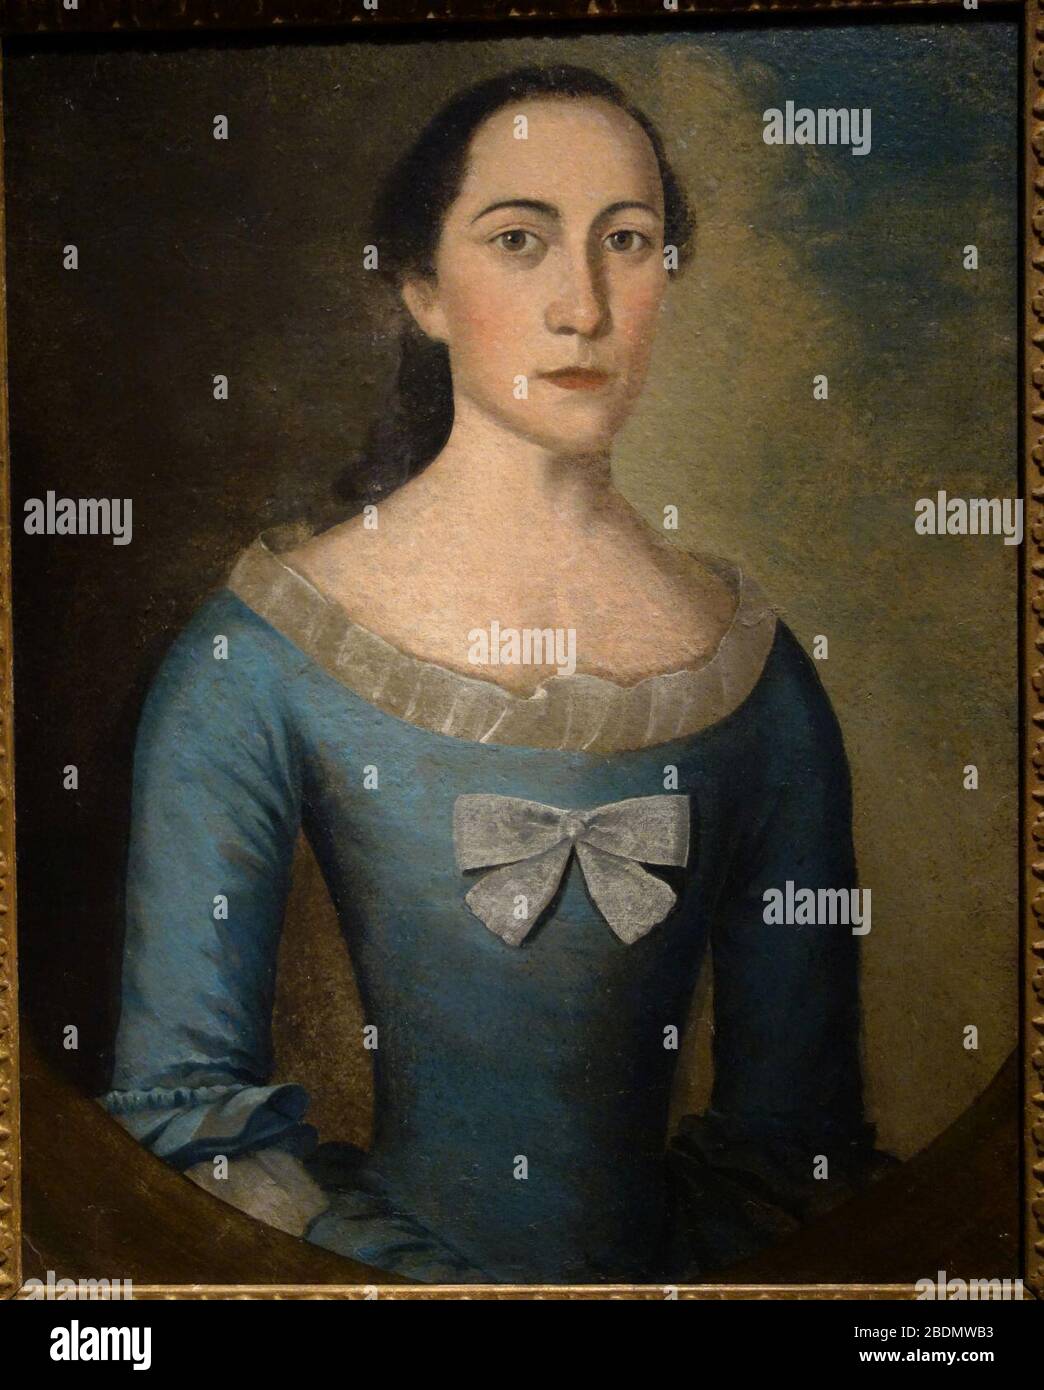 Hannah Minot Moody by Joseph Badger, c. 1758, oil on board mounted on canvas Stock Photo